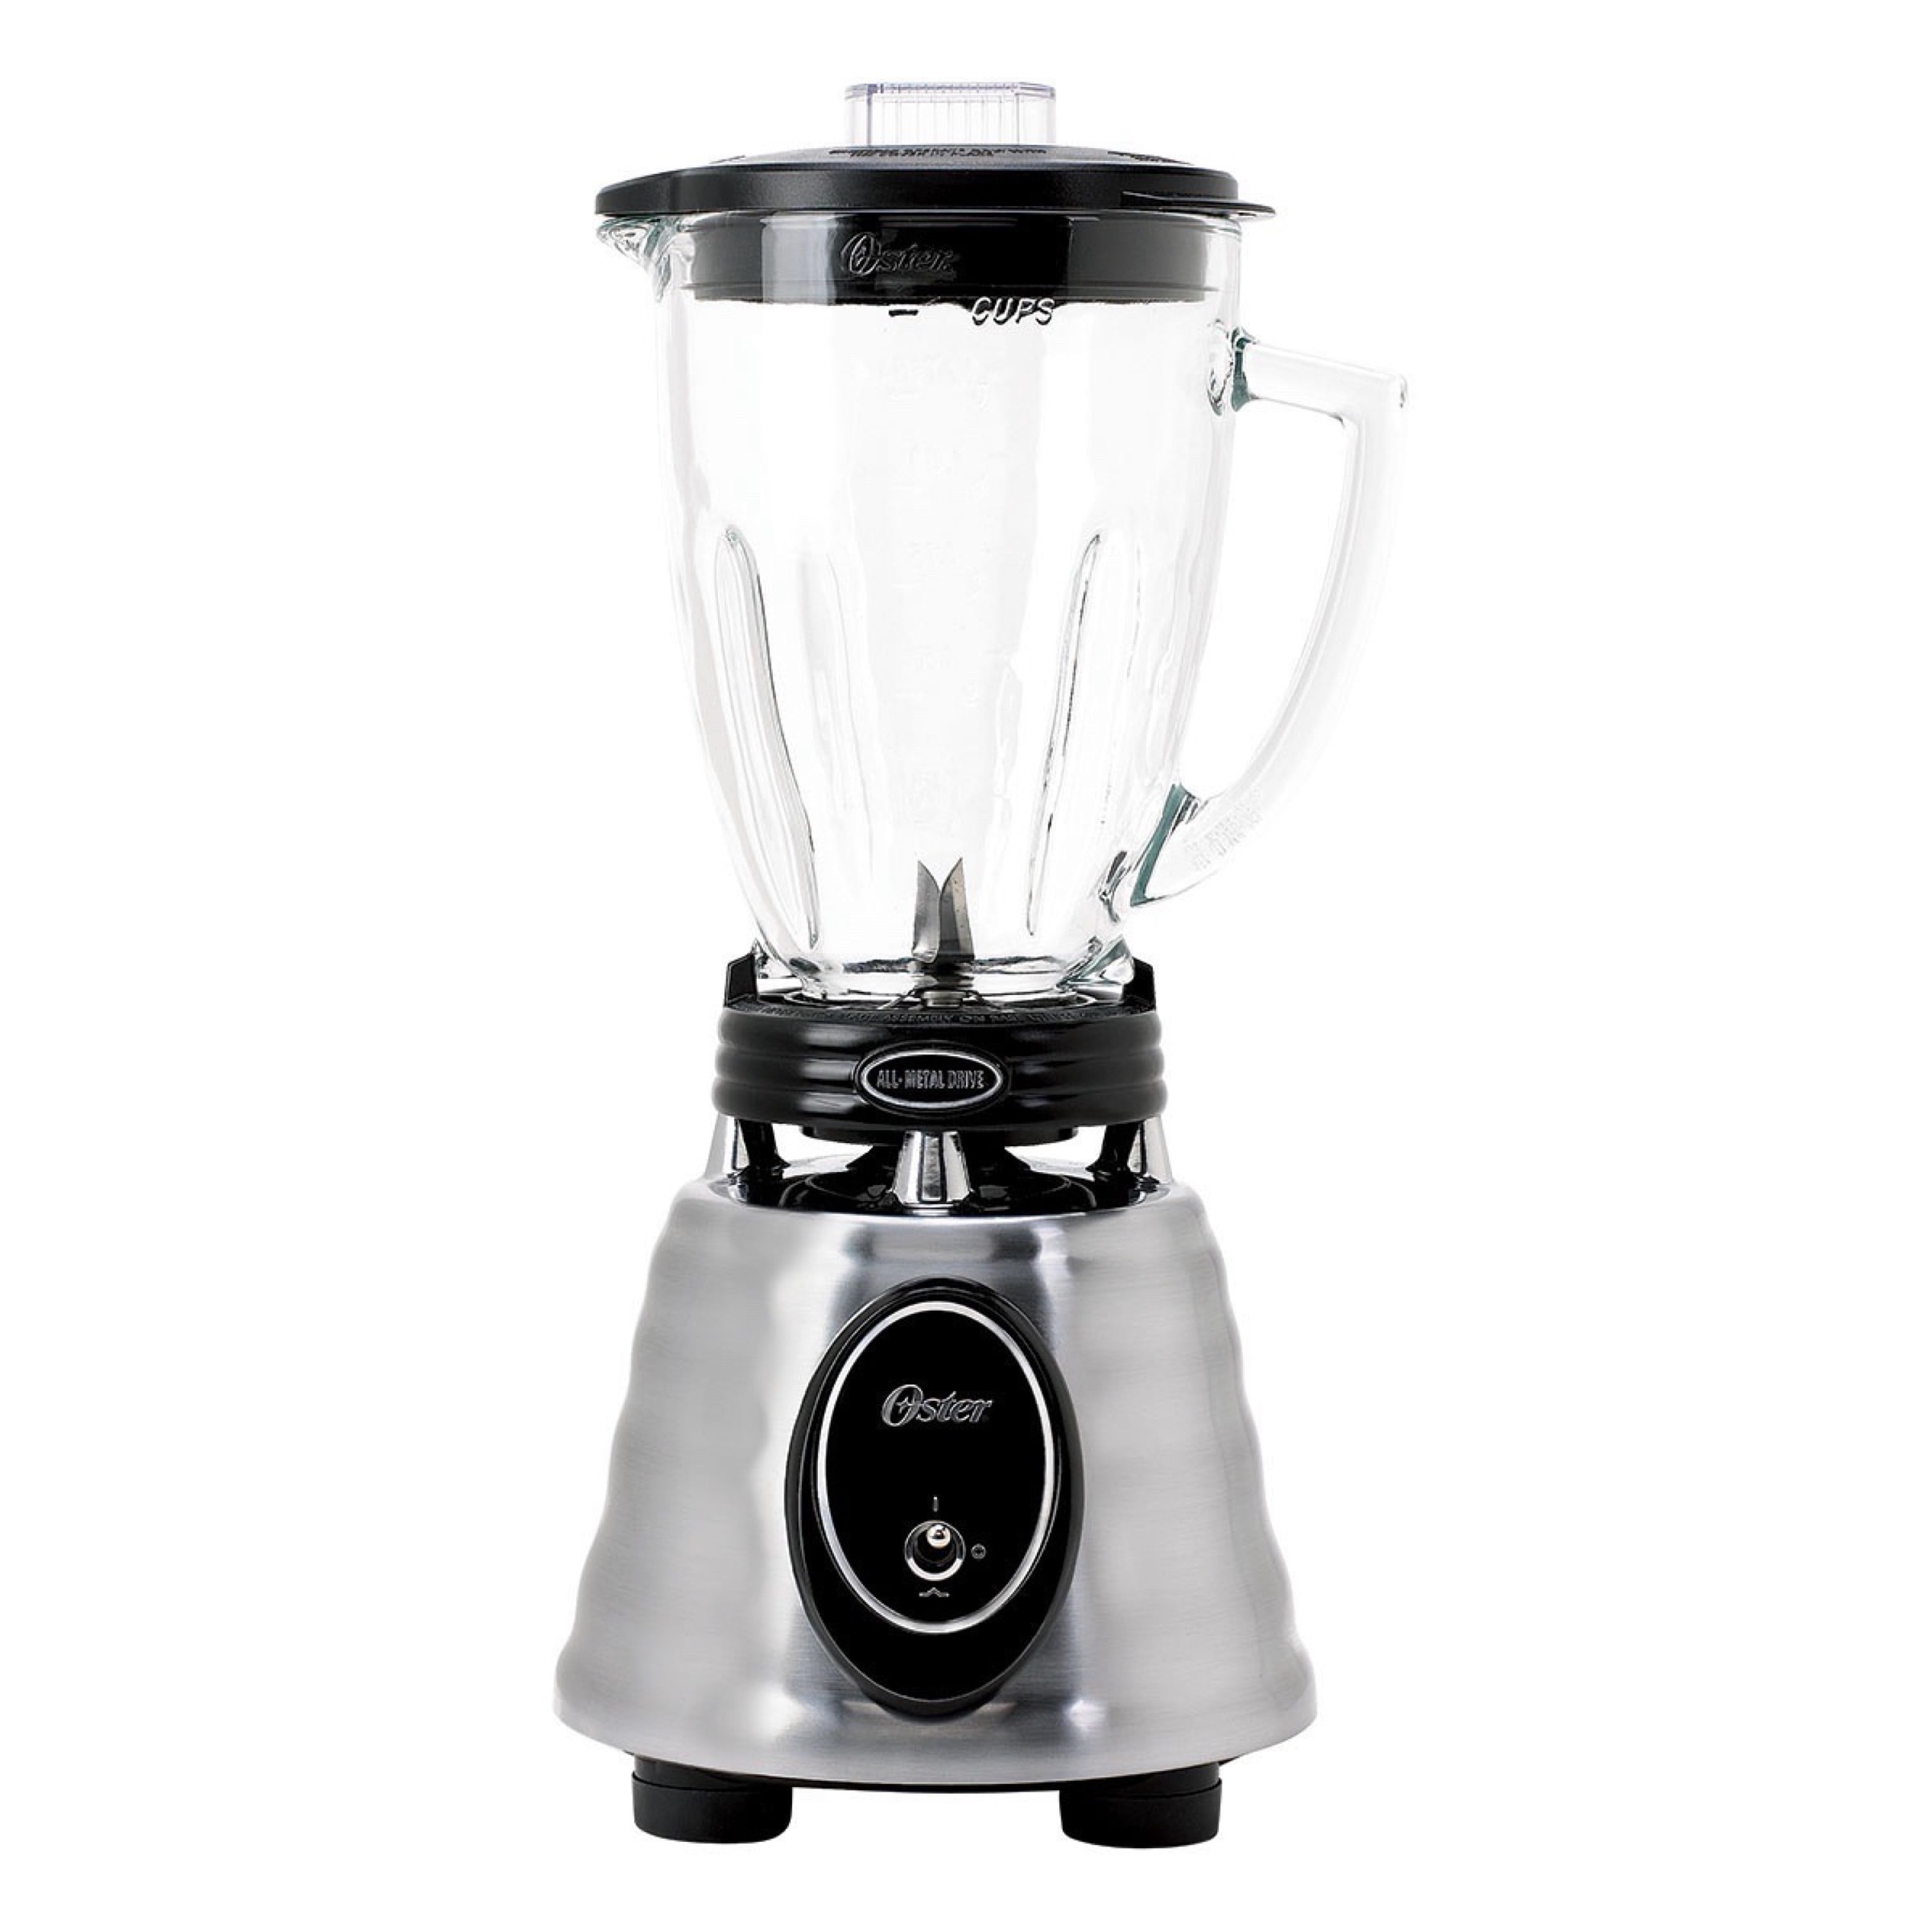 Oster® Classic Series Heritage Blender With 6-Cup Glass Jar